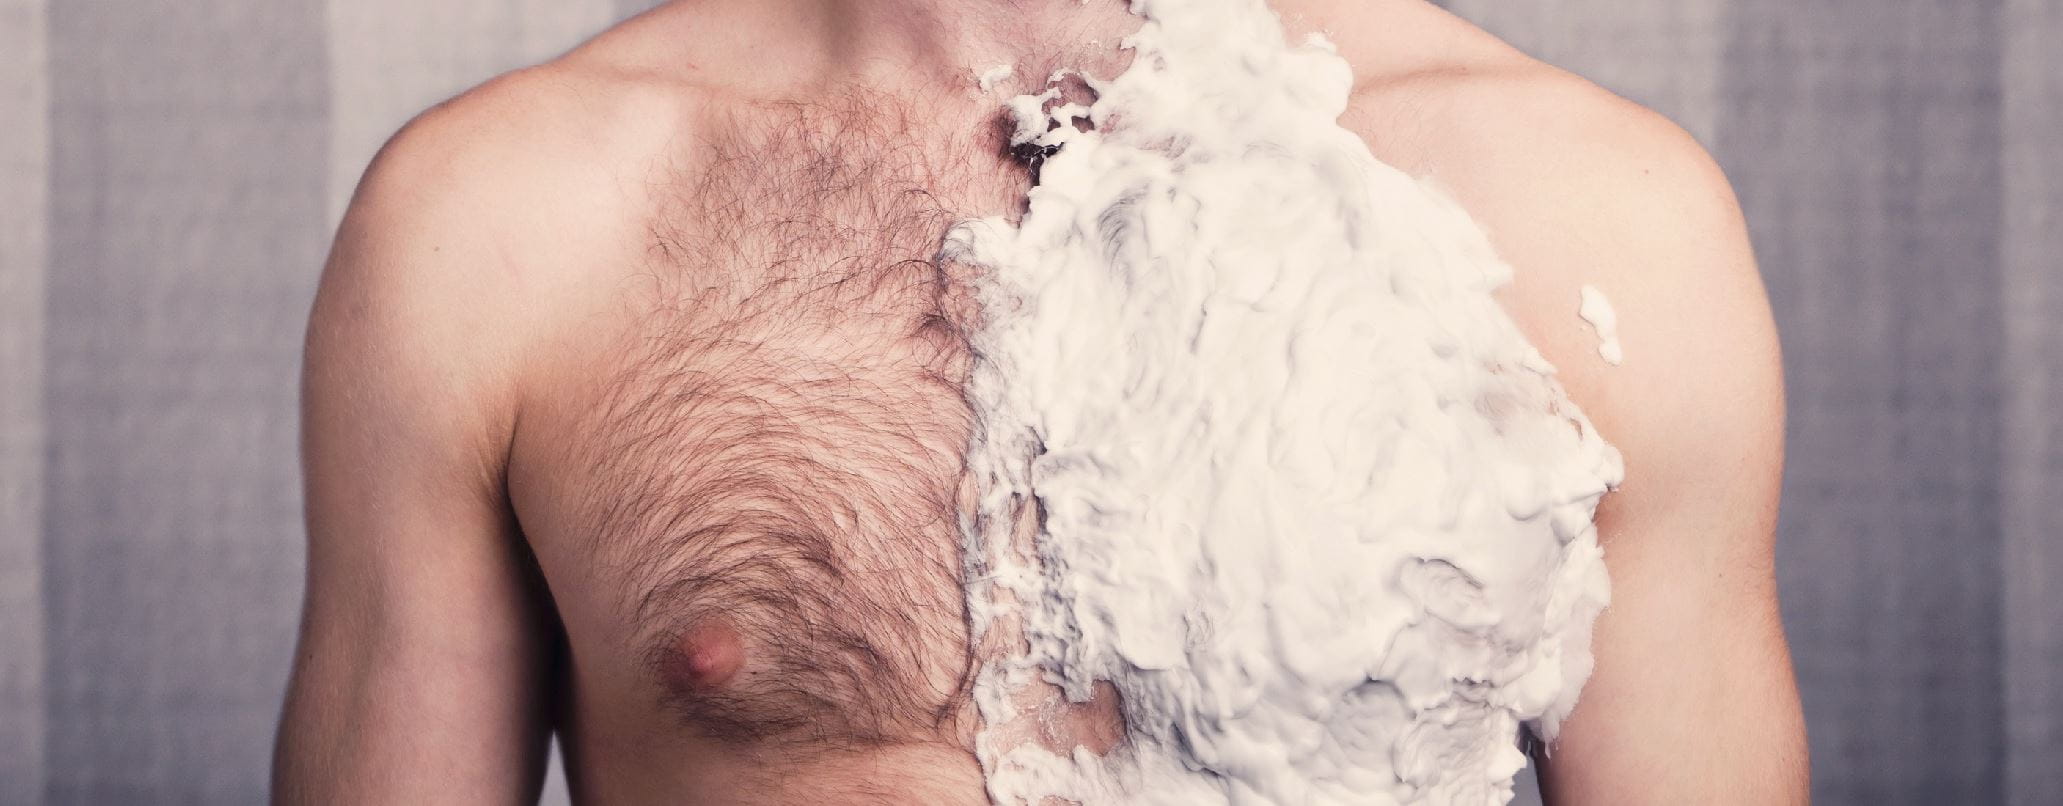 How To Shave Chest Hair, Shaving